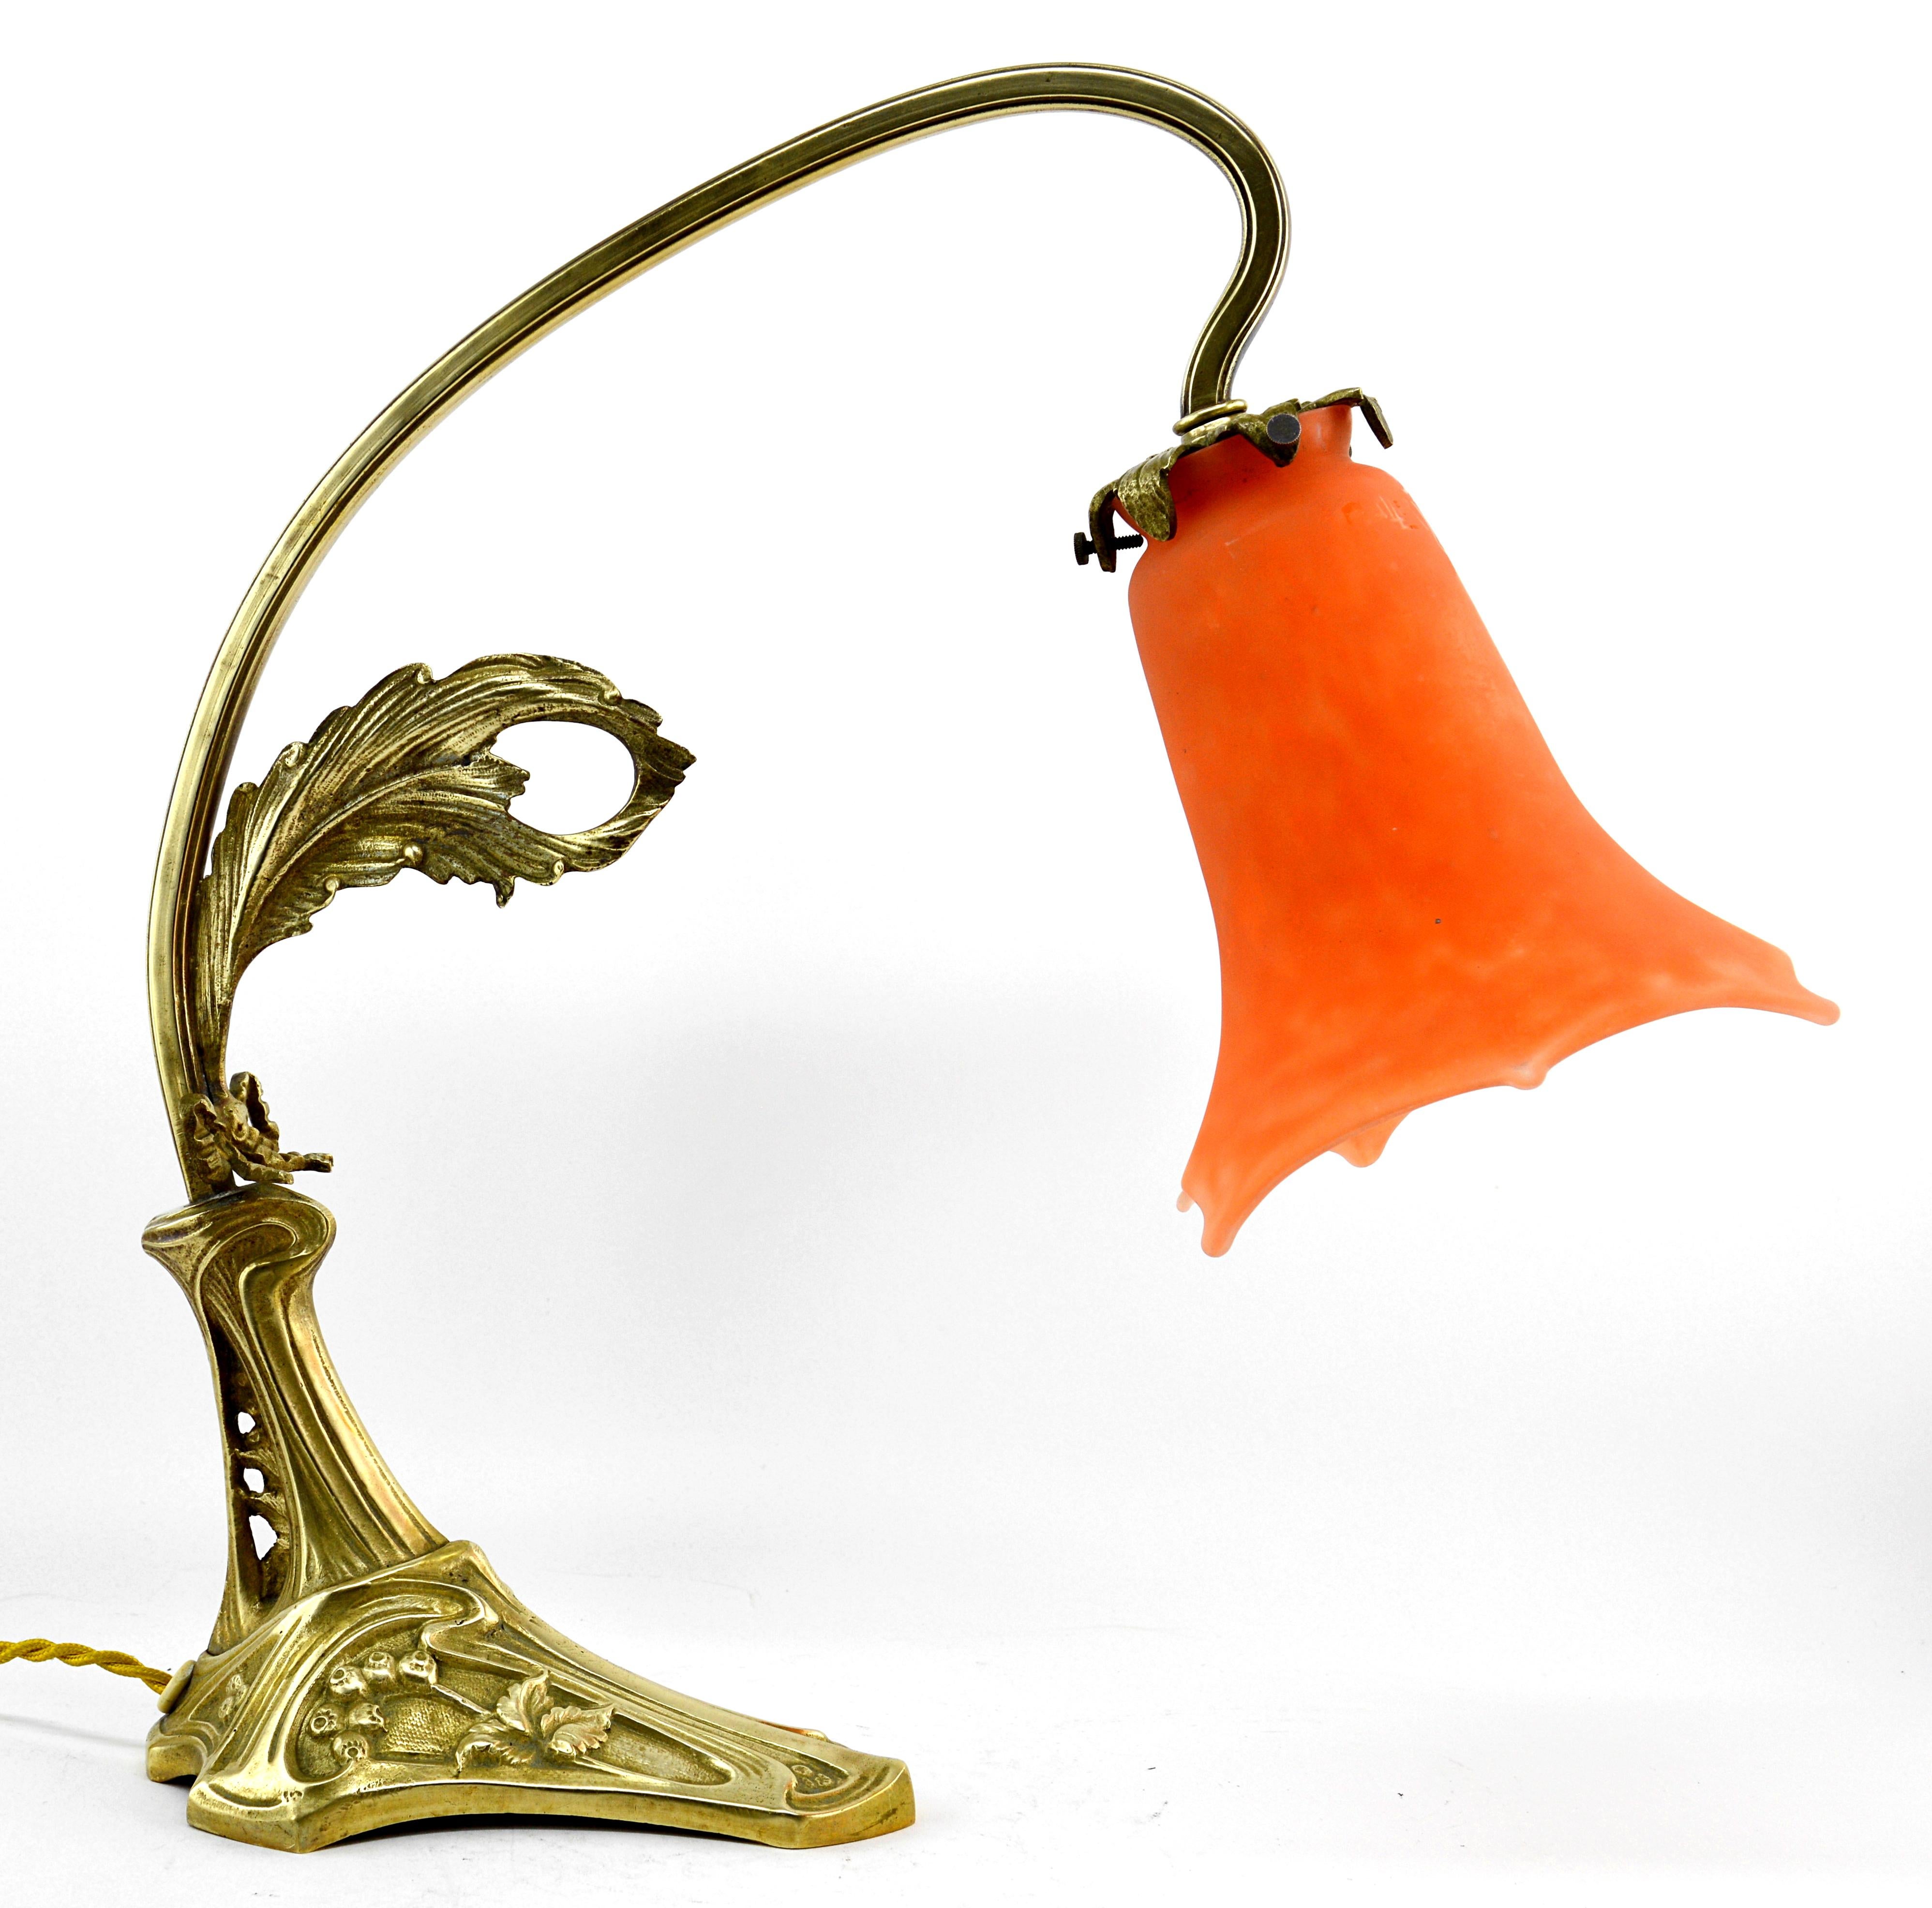 French Art Nouveau / Deco table / desk lamp by Muller Freres (Luneville), France, 1918-1920. Glass and solid bronze. Mottled blown double glass shade stretched with pliers. Traditional Muller Frères orange color. Superb solid bronze base. Measures: